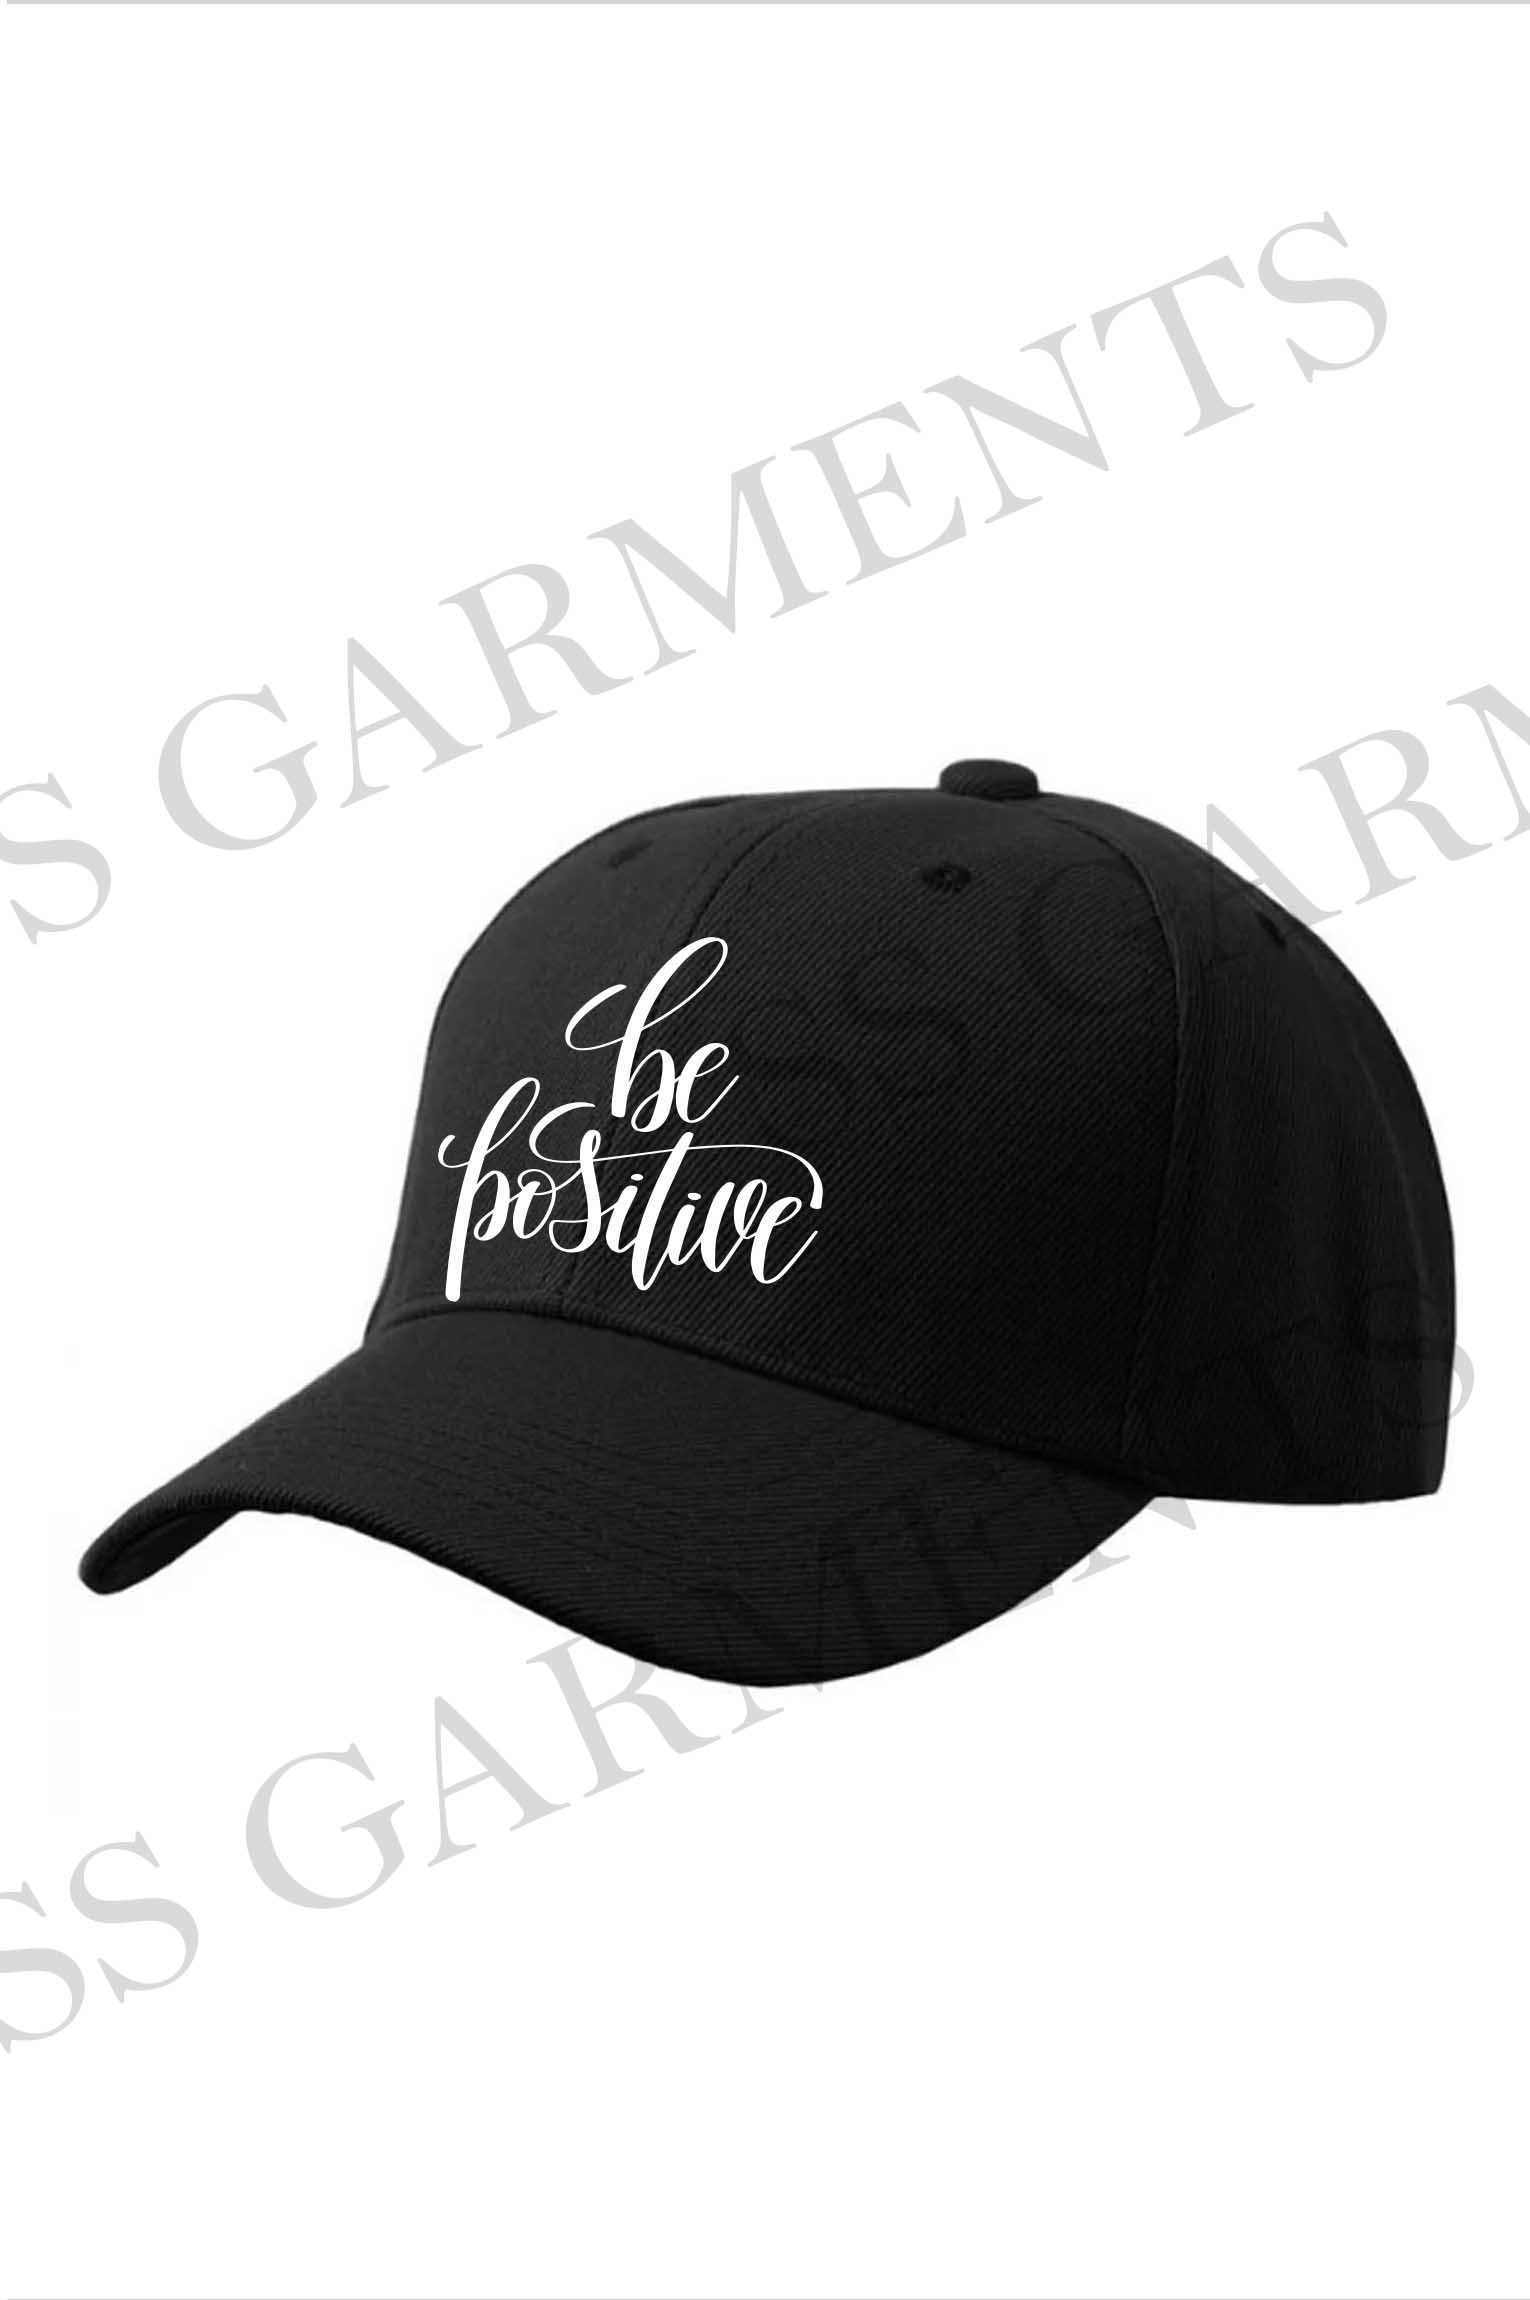 Be Positive Printed Hat Premium Quality